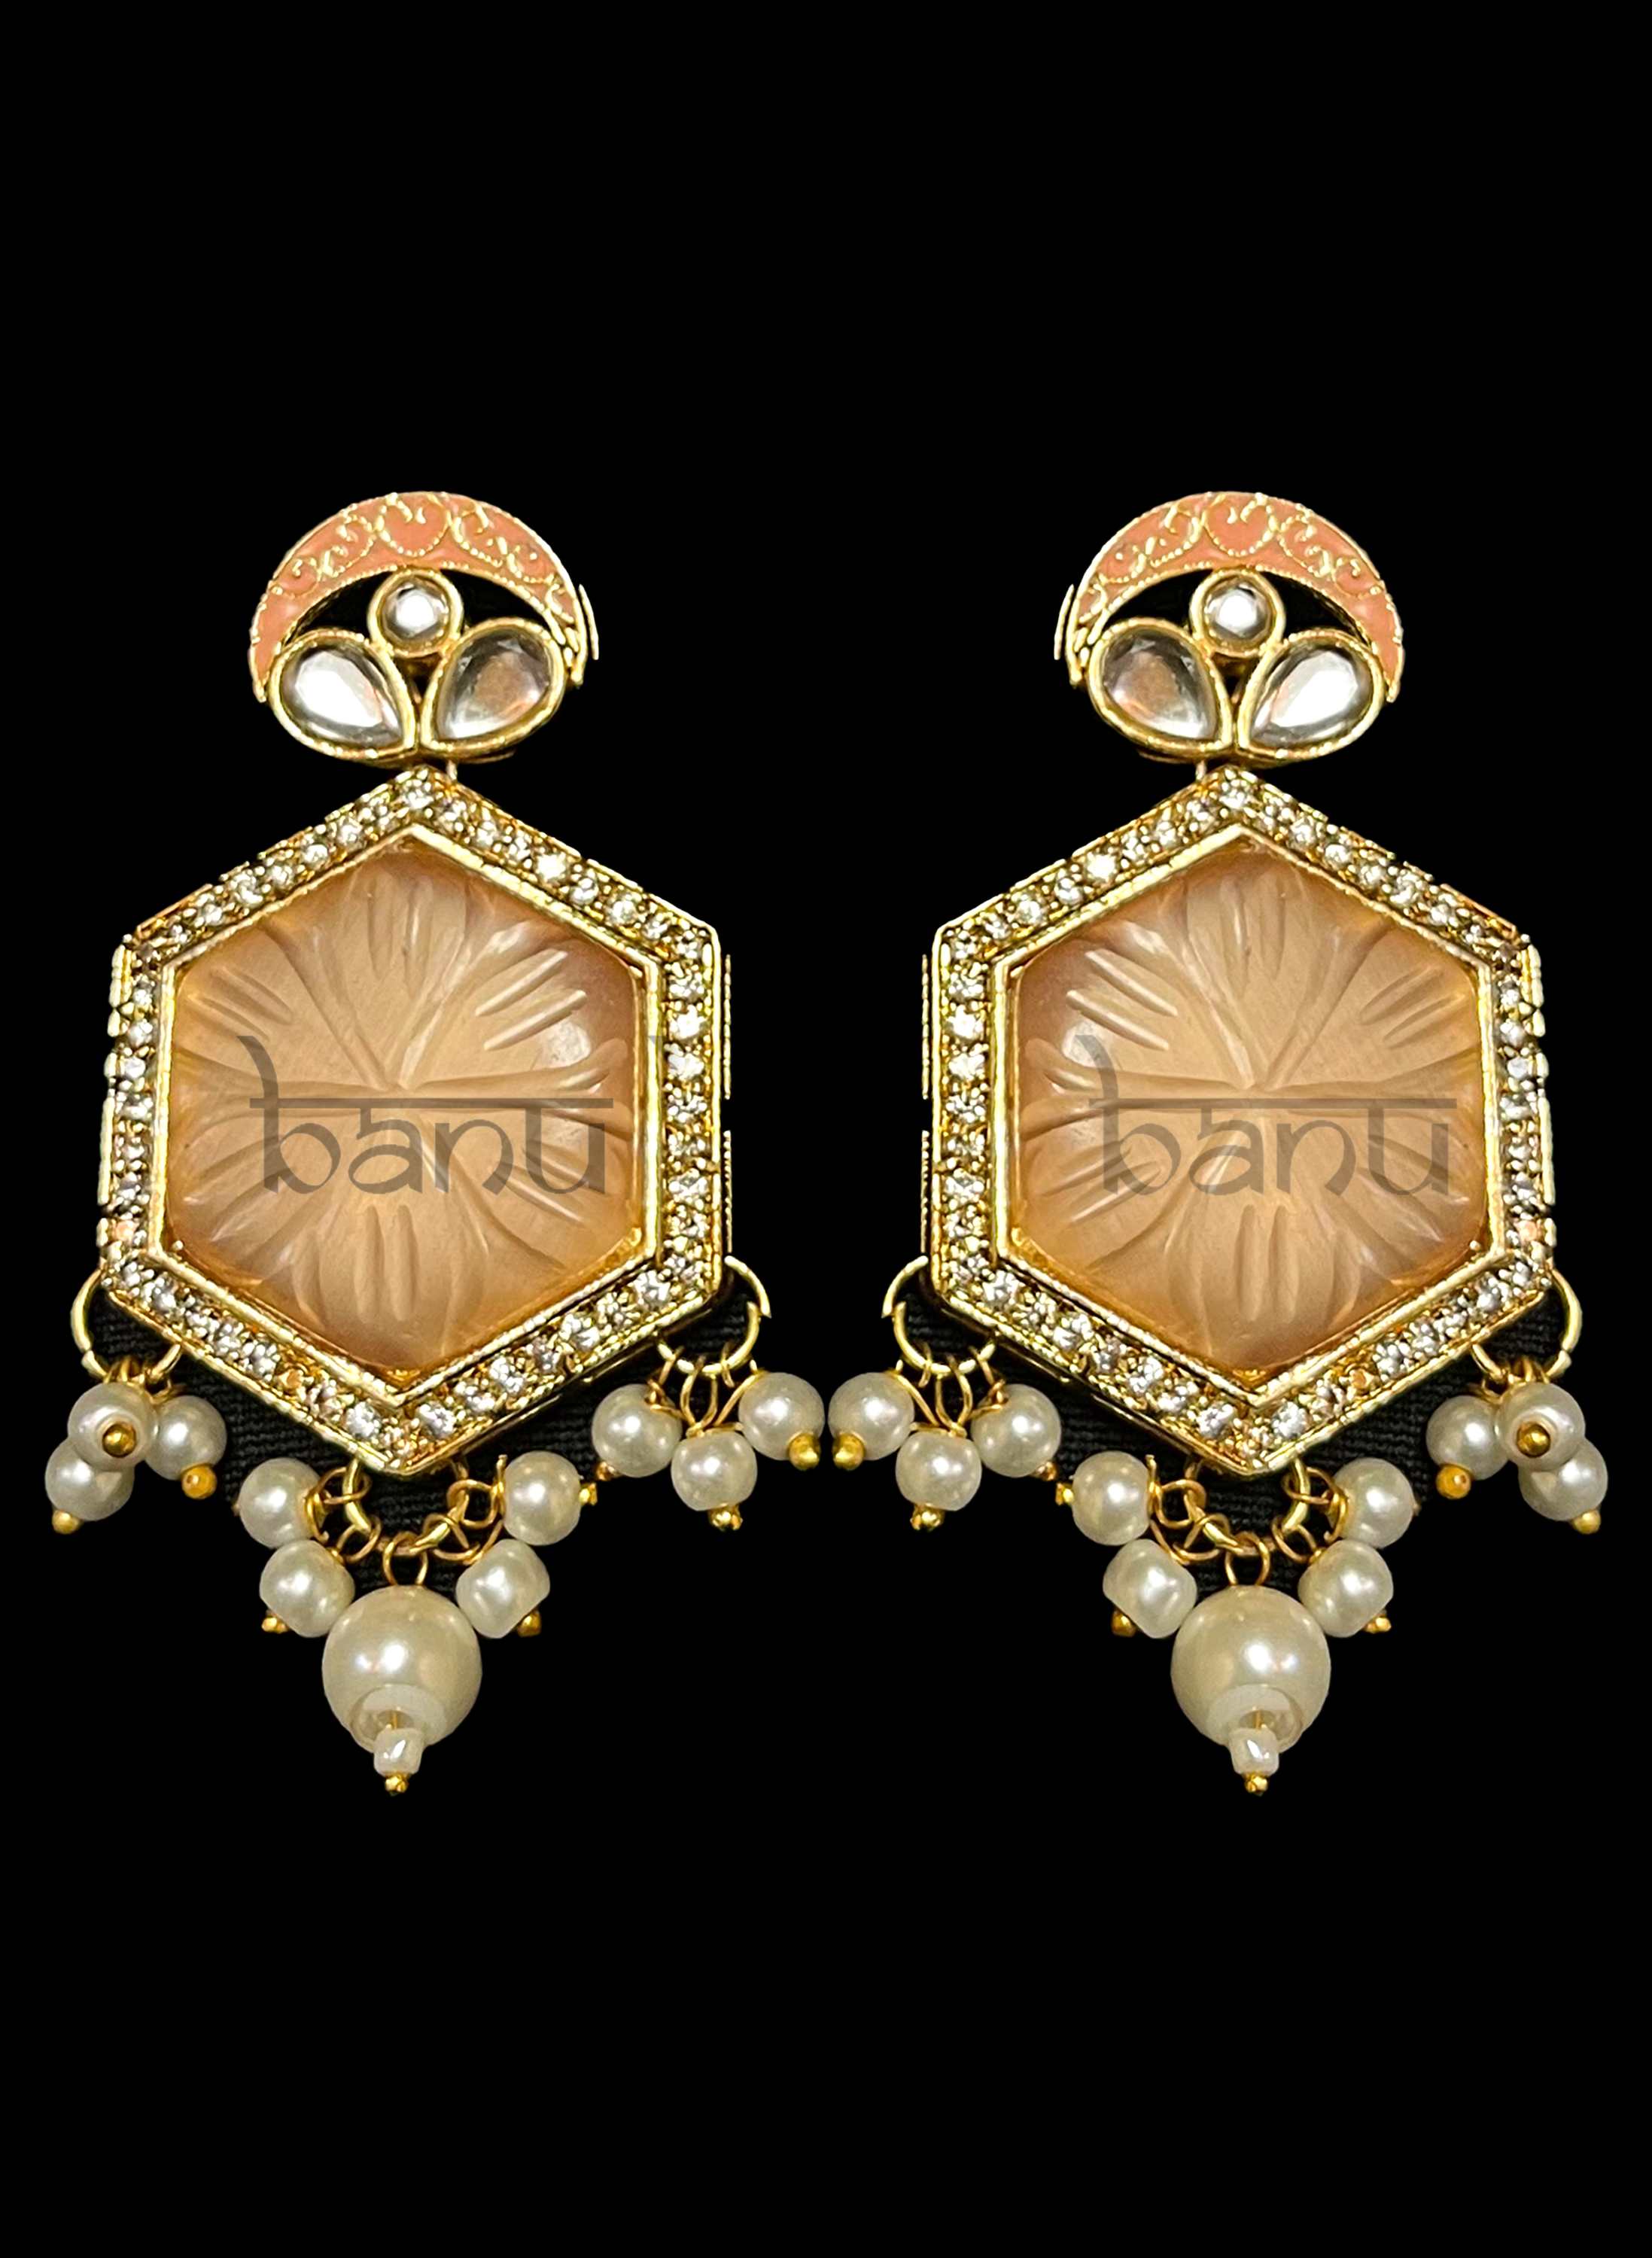 Peach Indian Bridal Amarpali earrings with pearl drops